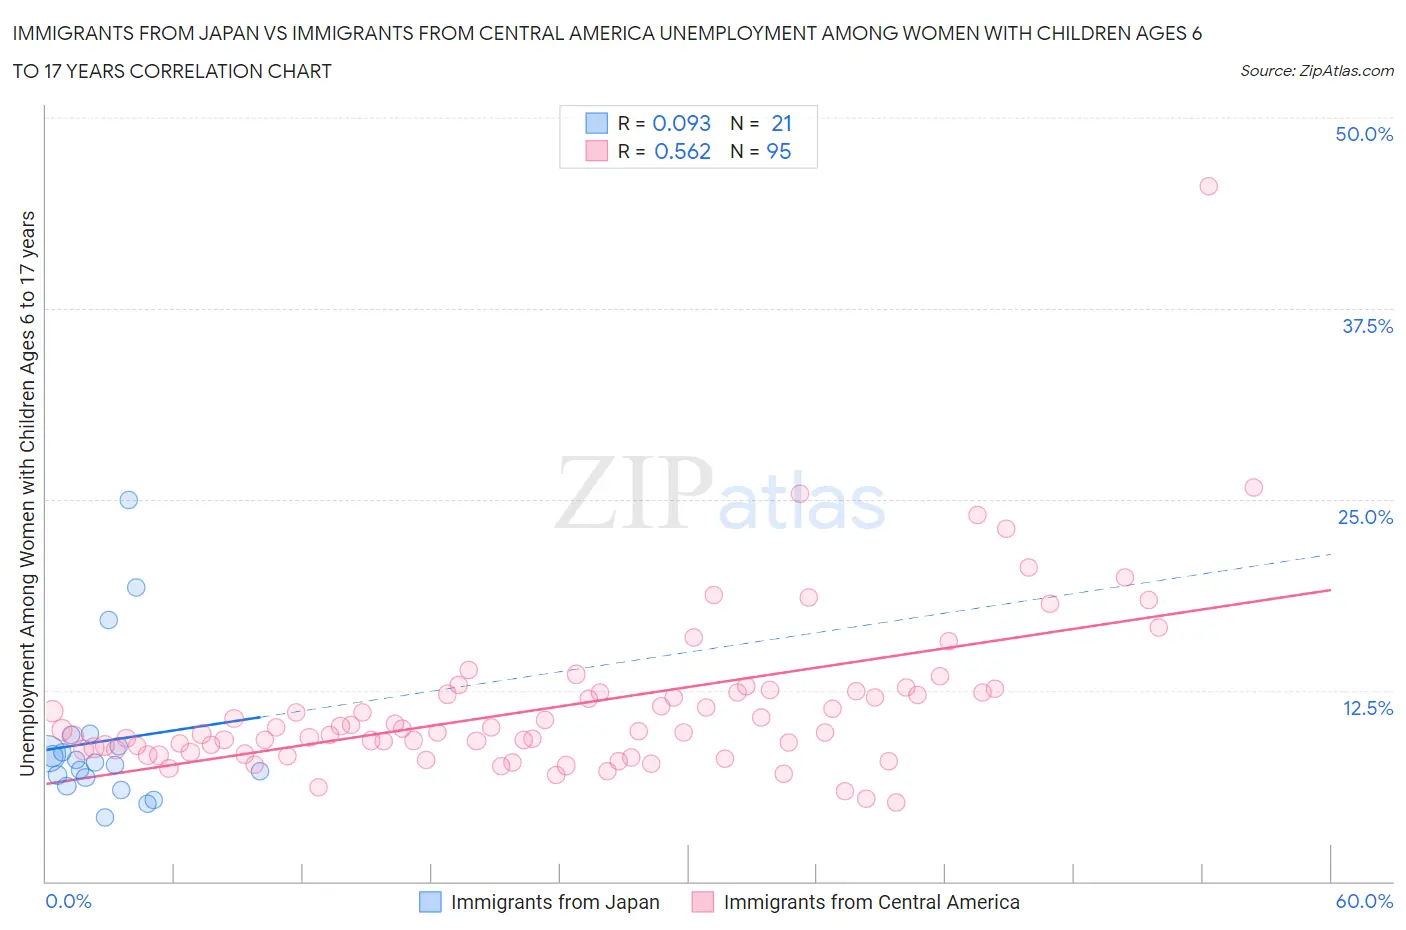 Immigrants from Japan vs Immigrants from Central America Unemployment Among Women with Children Ages 6 to 17 years